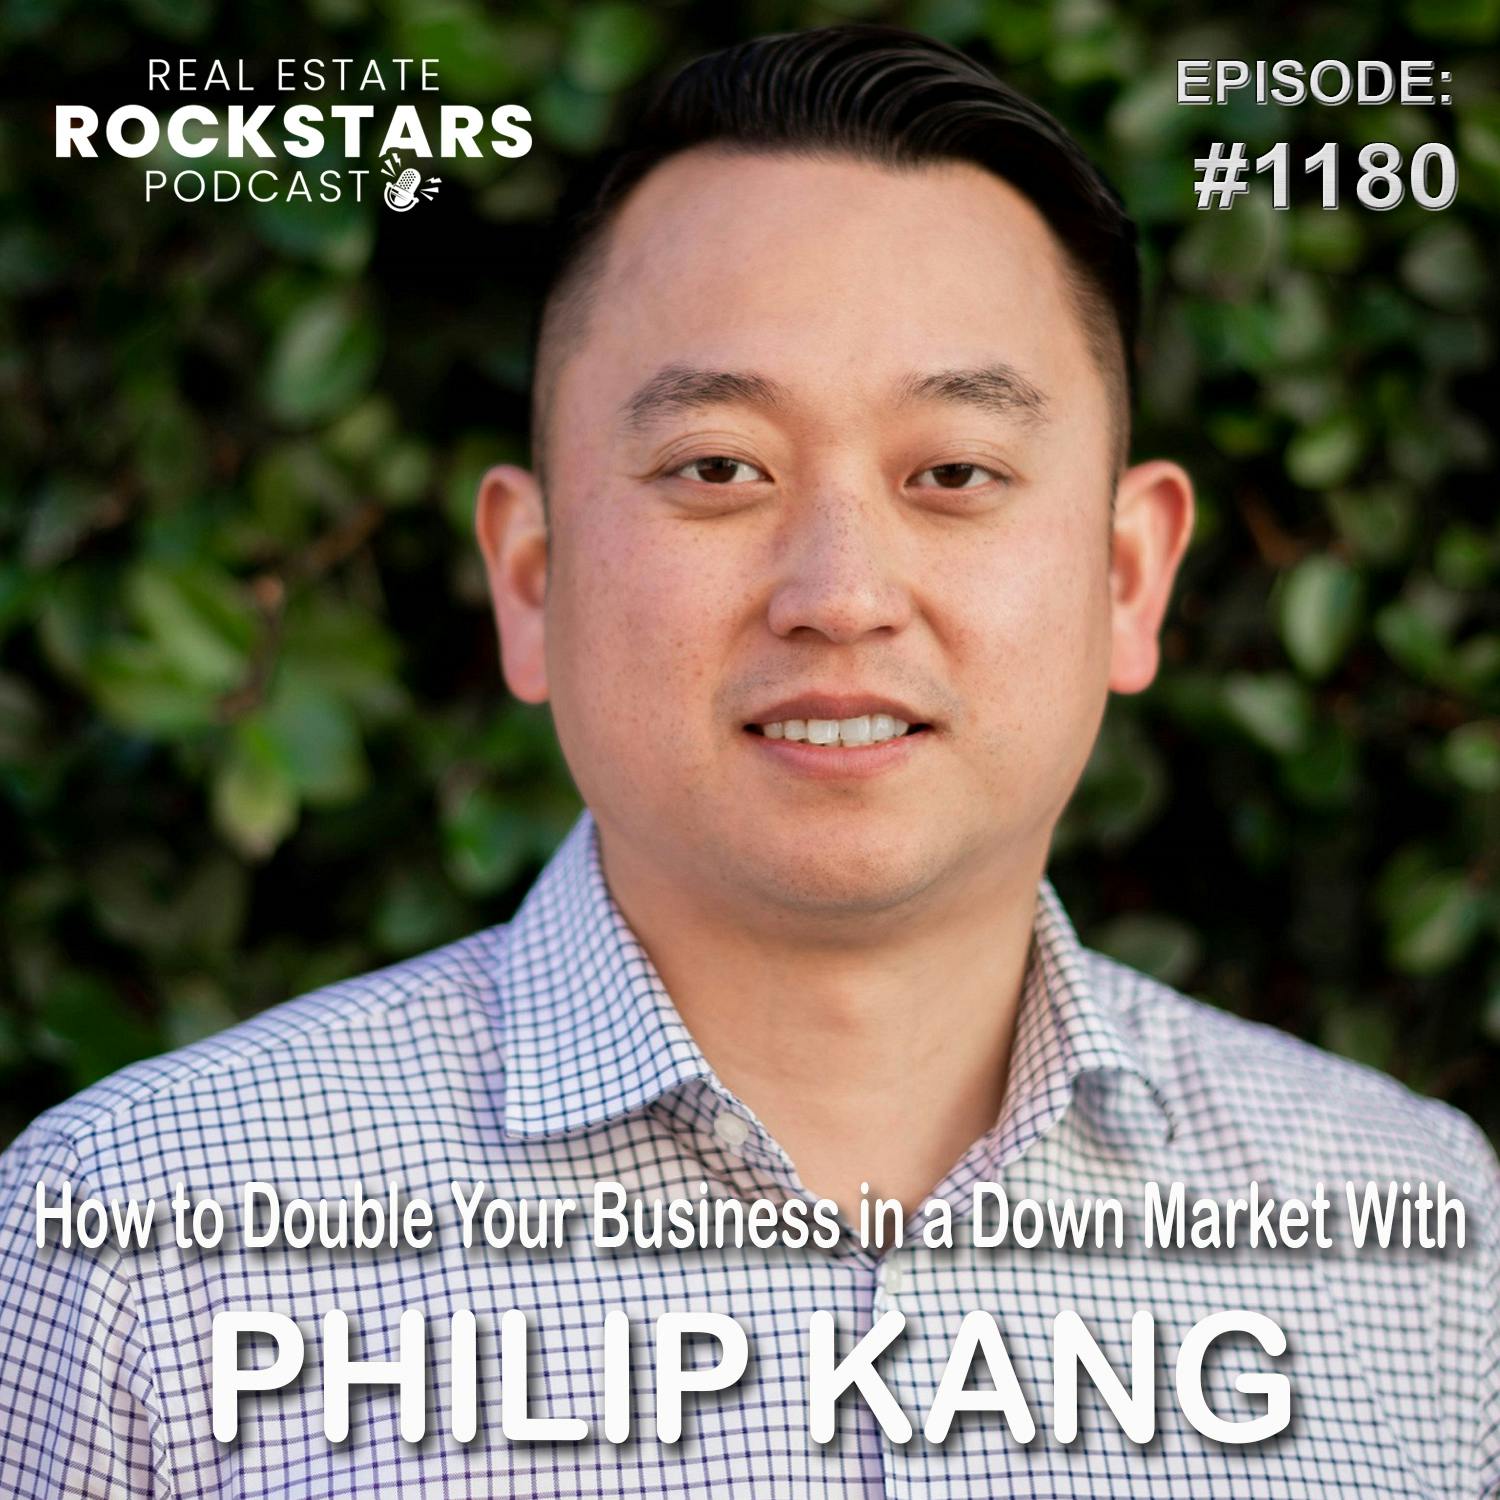 1180: How to Double Your Business in a Down Market With Philip Kang